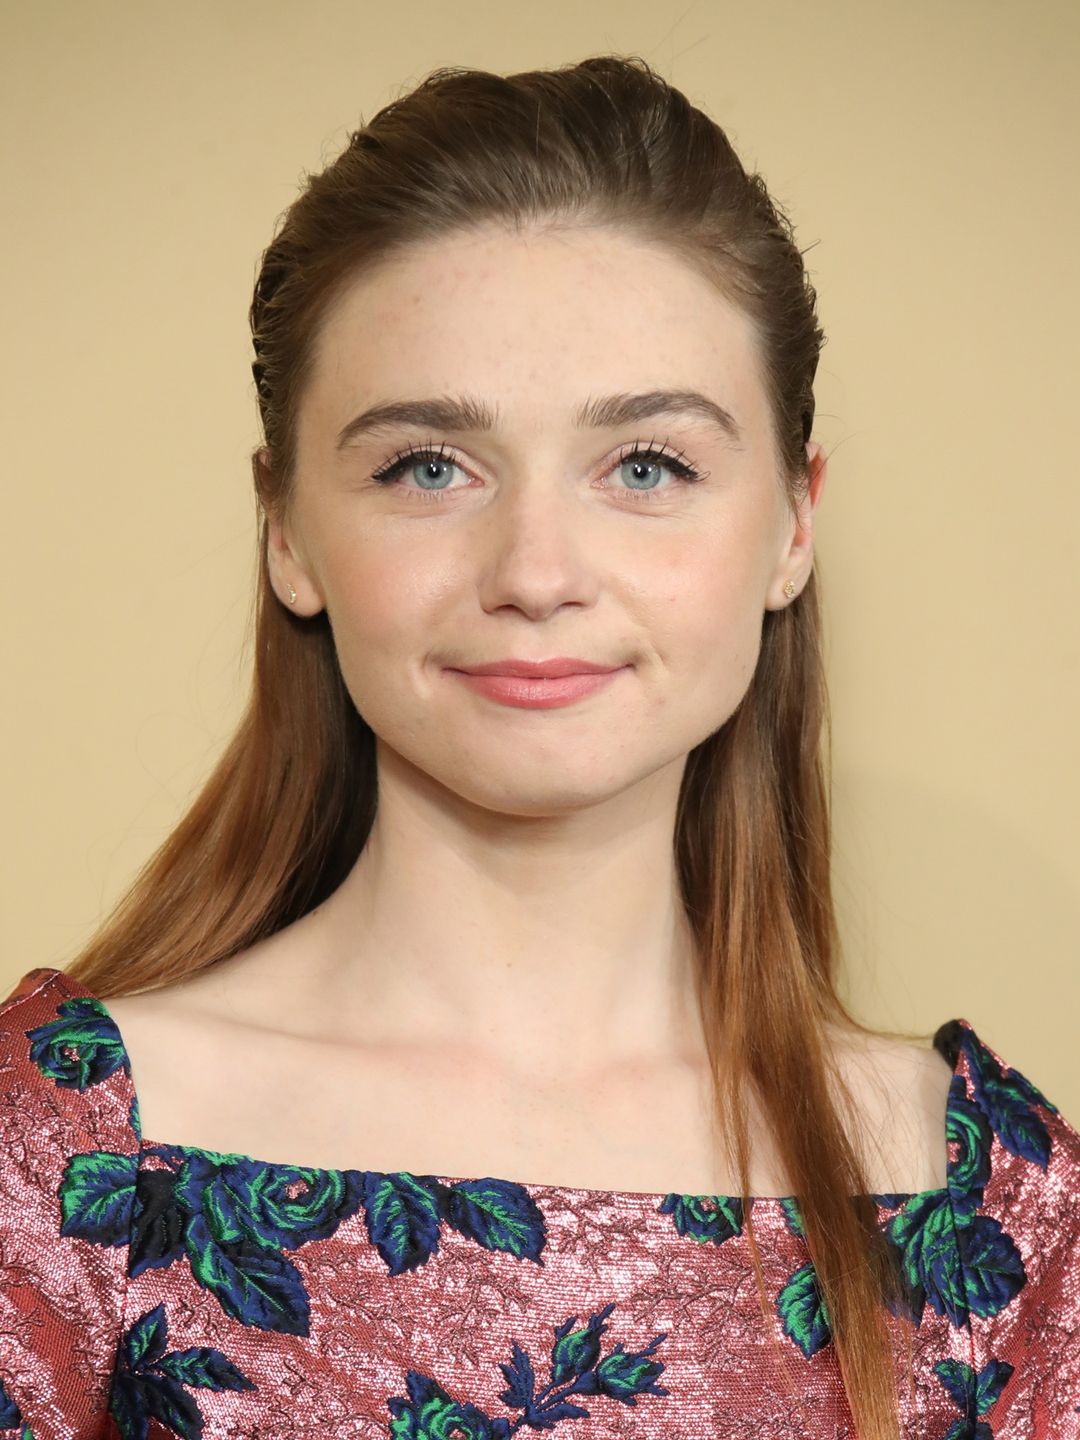 Jessica Barden who is her father